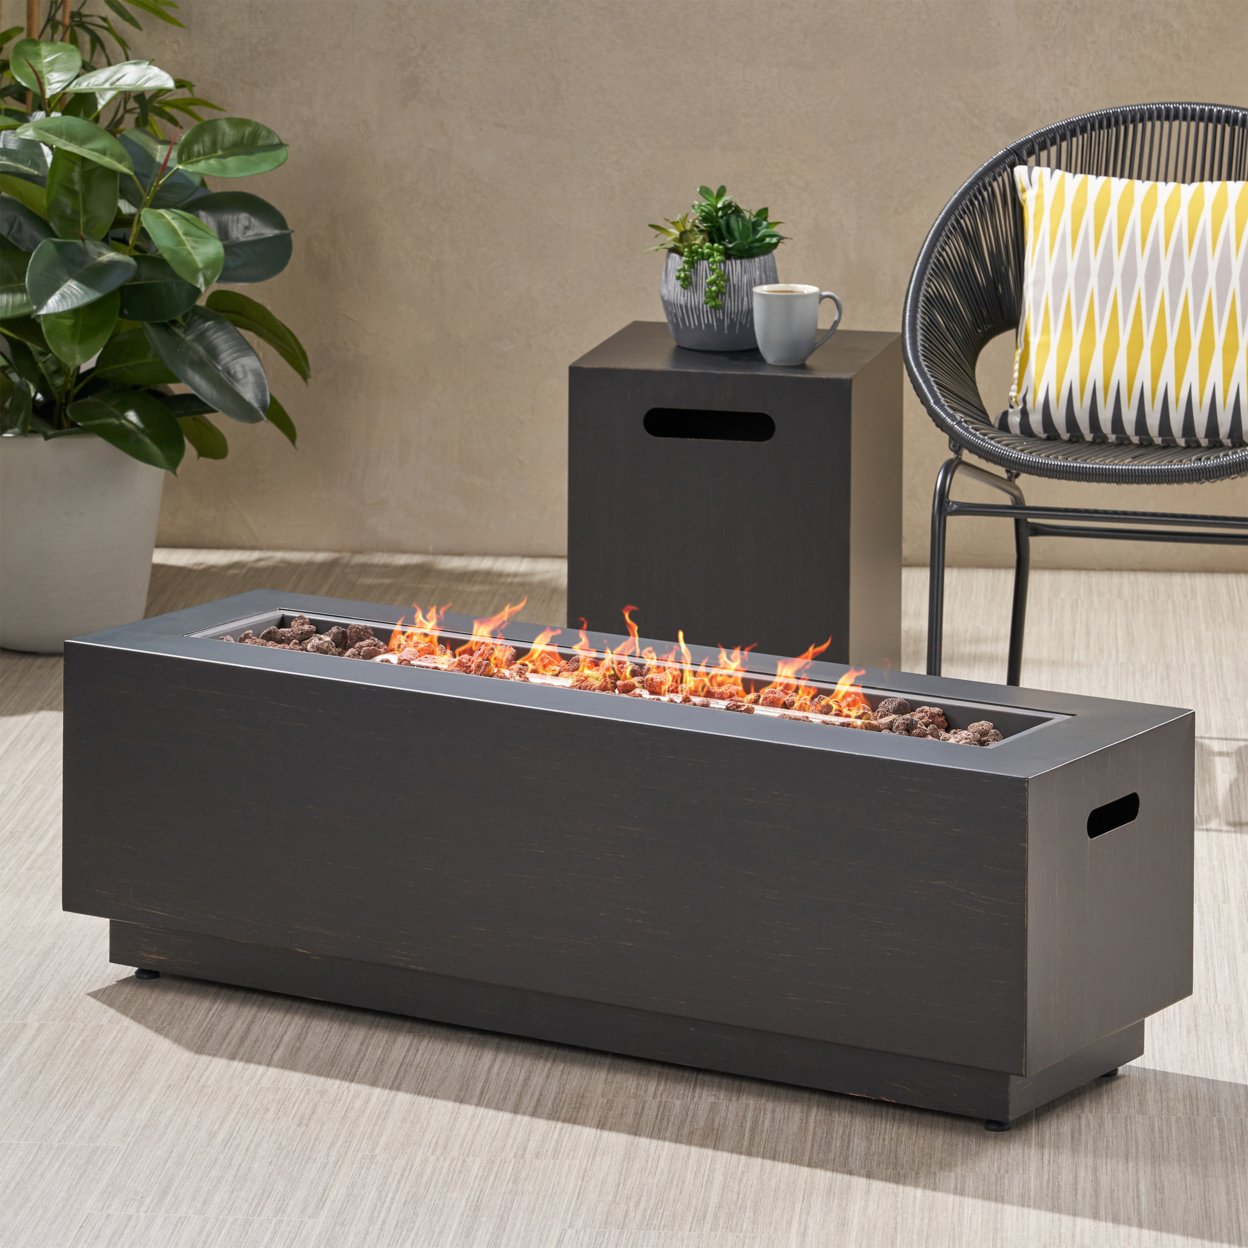 Hemmingway Outdoor Rectangular Fire Pit With Tank Holder - Brushed Brown Finish